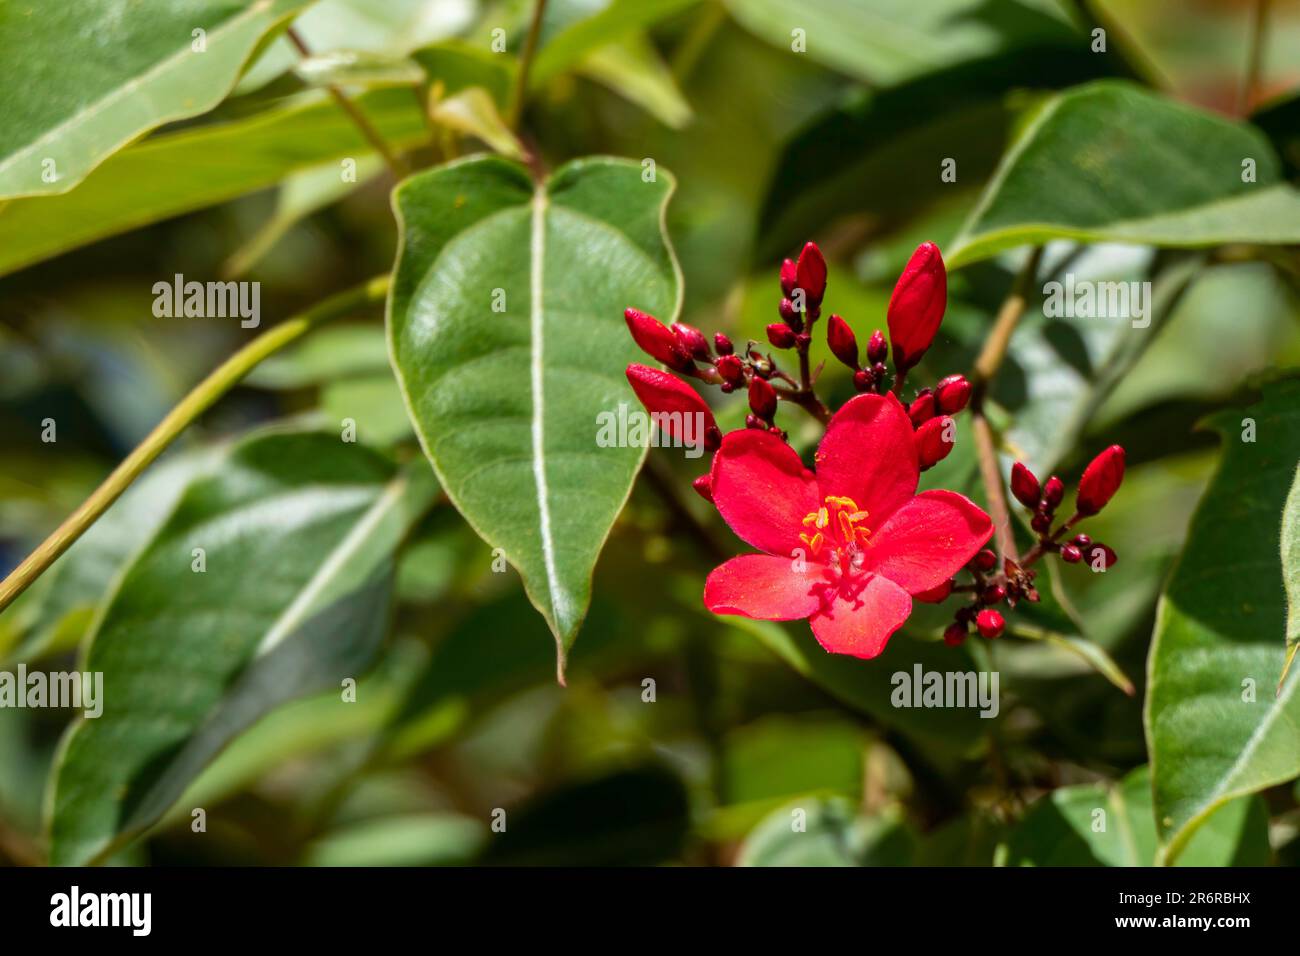 Peregrina, Spicy Jatropha, Jatropha integerrima, Close up small red flowers isolated on natural background. Israel Stock Photo